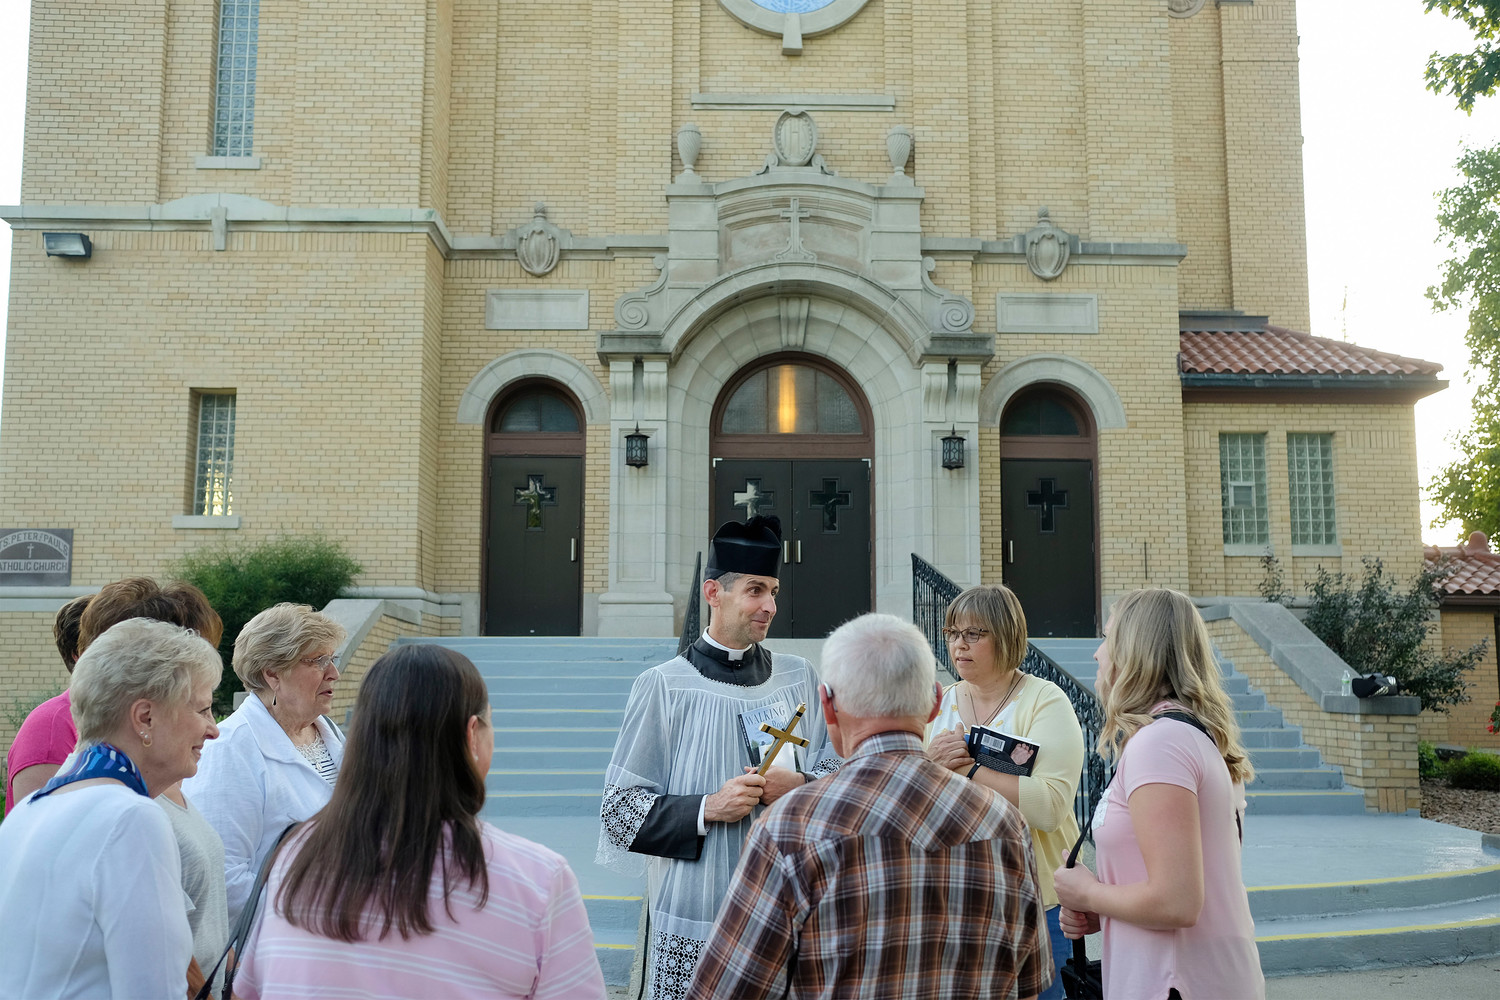 Father Lawrence Carney jokes with people outside Ss. Peter and Paul Church in West Bend, Iowa, July 9. Earlier the “walking priest,” as he is known gave a talk about his street evangelization as part of the parish’s Grotto Speaker Series. A priest of the Diocese of Wichita., Kan, he is on loan to the Diocese of Kansas City-St. Joseph, Mo., where he is chaplain to the Benedictines of Mary, Queen of Apostles in Gower, Missouri.